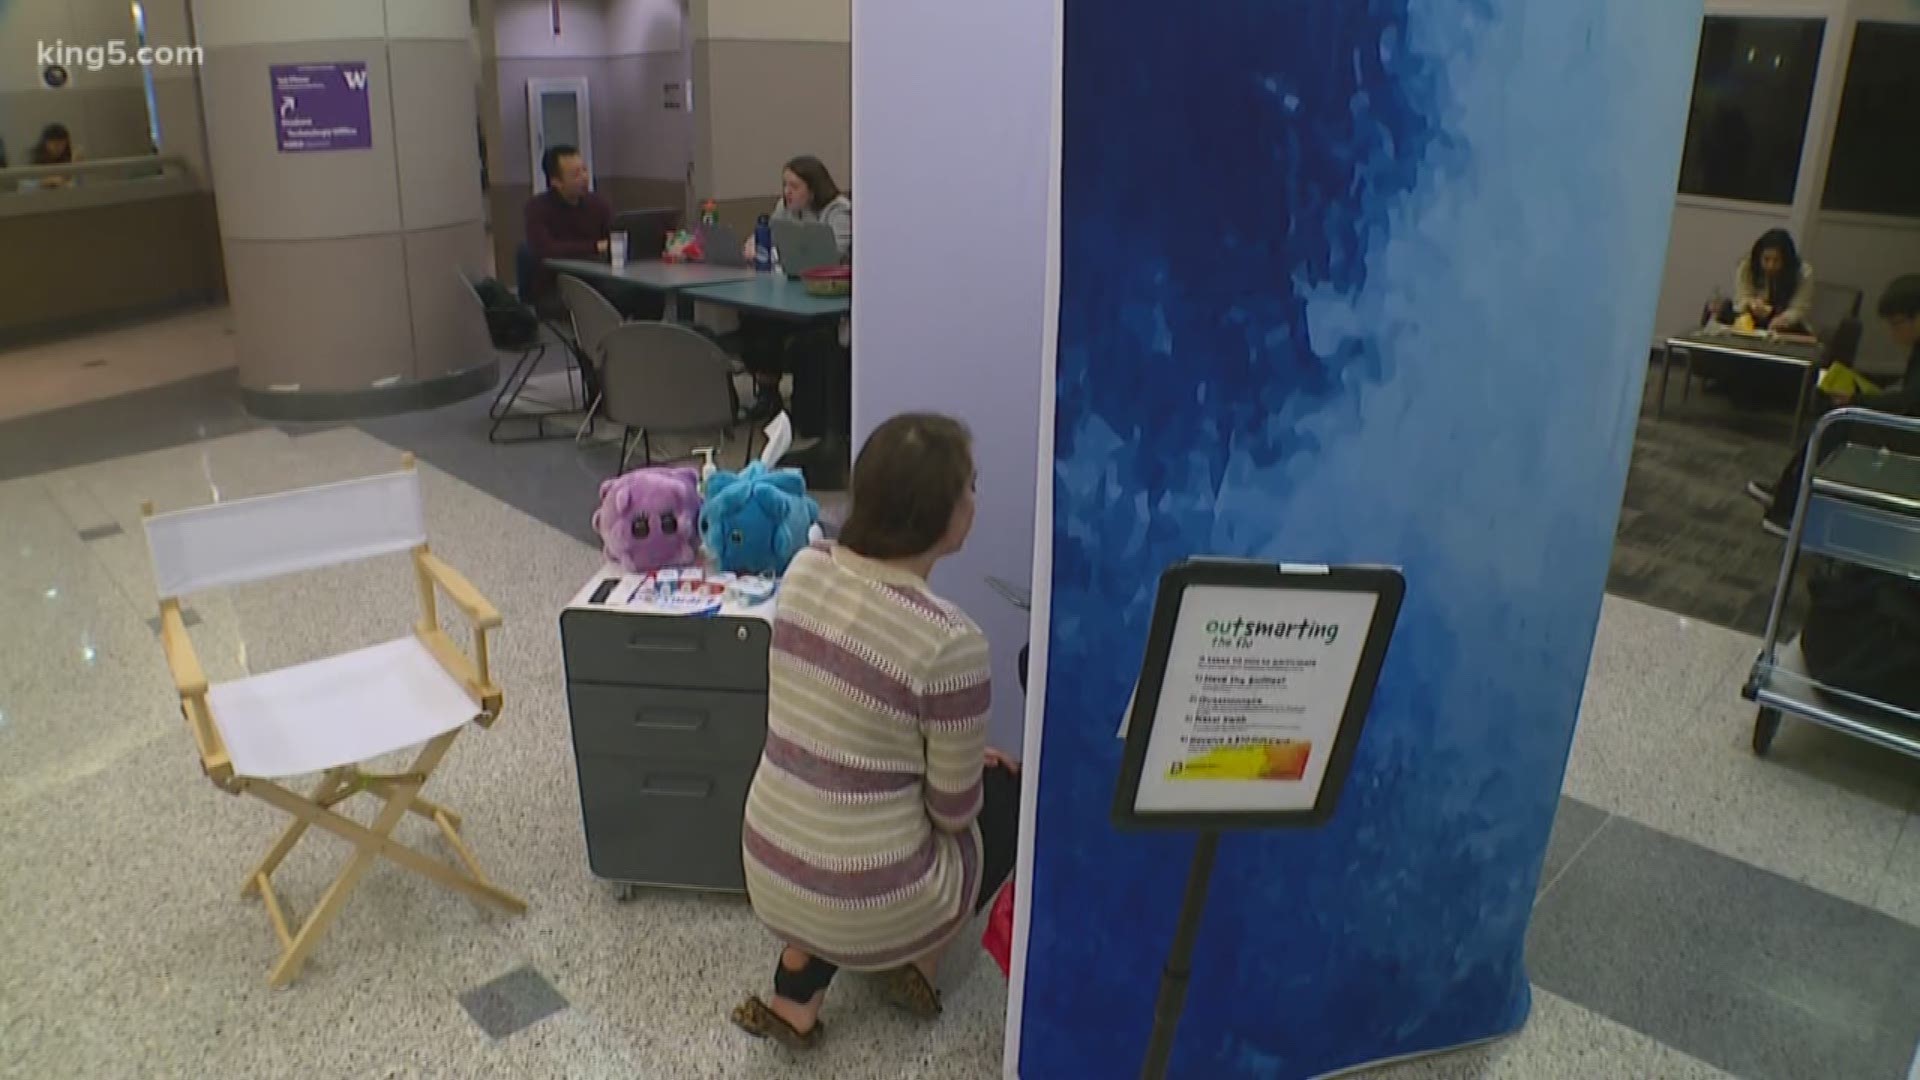 The flu is spreading and there has been a recent uptick in cases. A new study, which needs your help, aims to find out how to get ahead of the virus, to prevent the sick day, hospital visits, and deaths it causes each year. KING 5's Ted Land joins us with more.